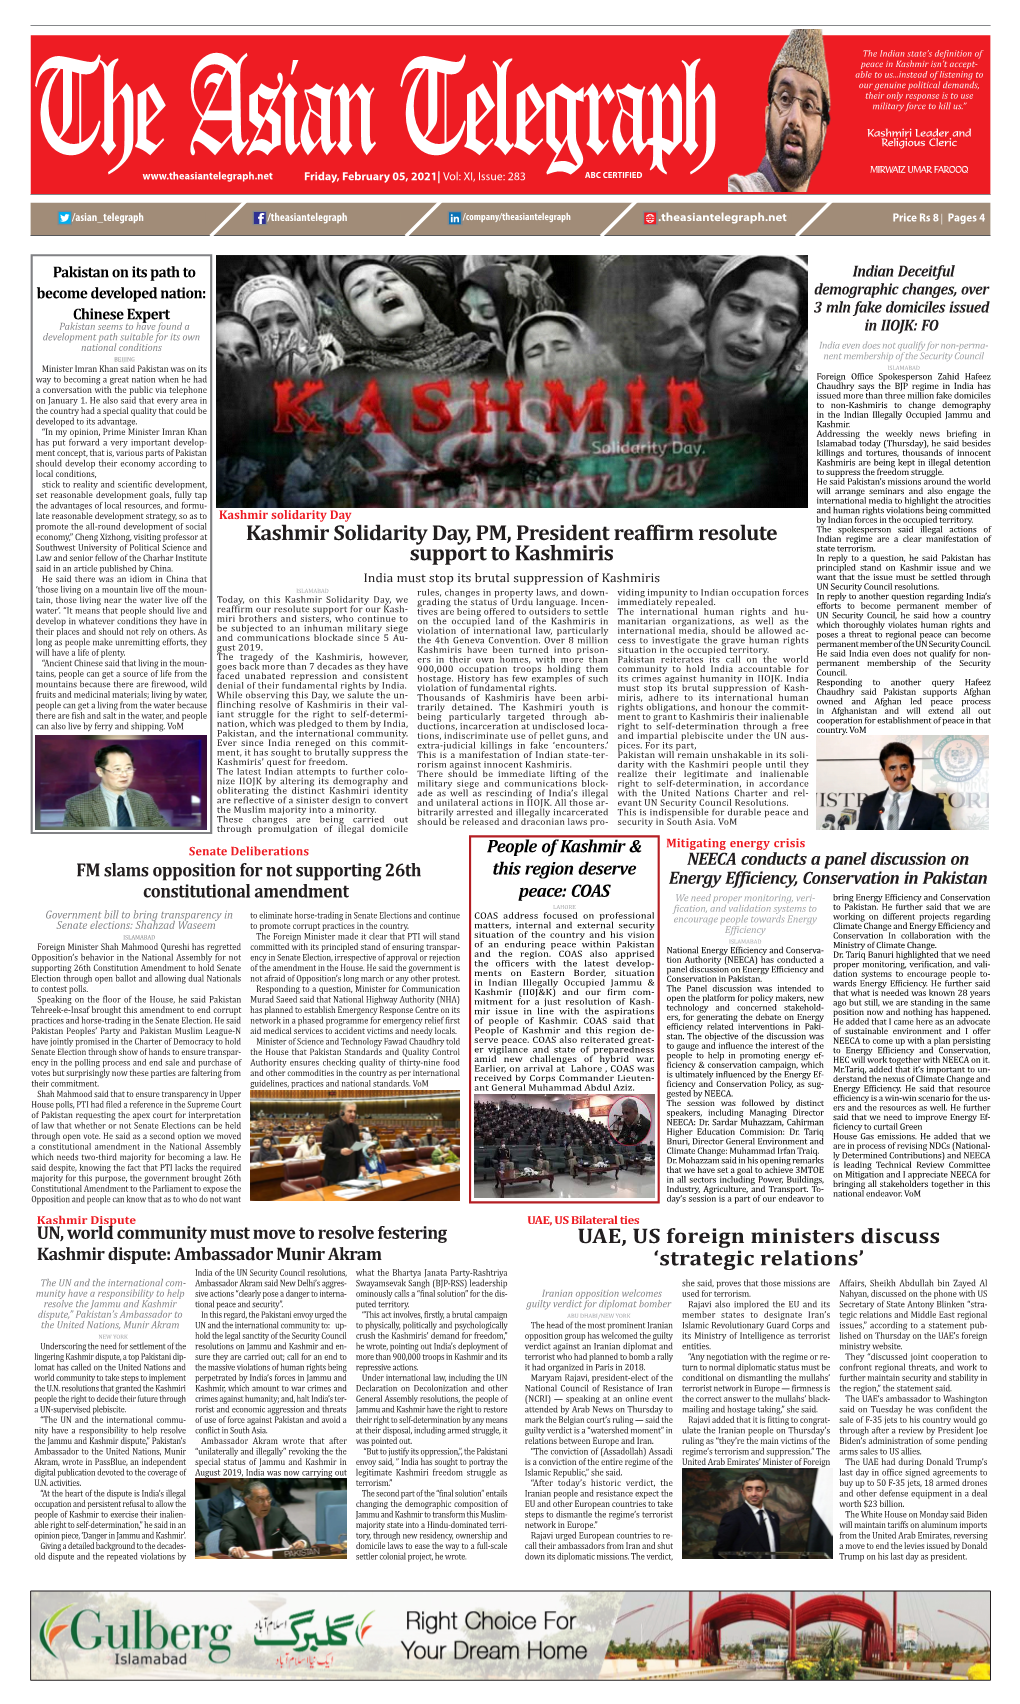 Kashmir Solidarity Day, PM, President Reaffirm Resolute Support to Kashmiris